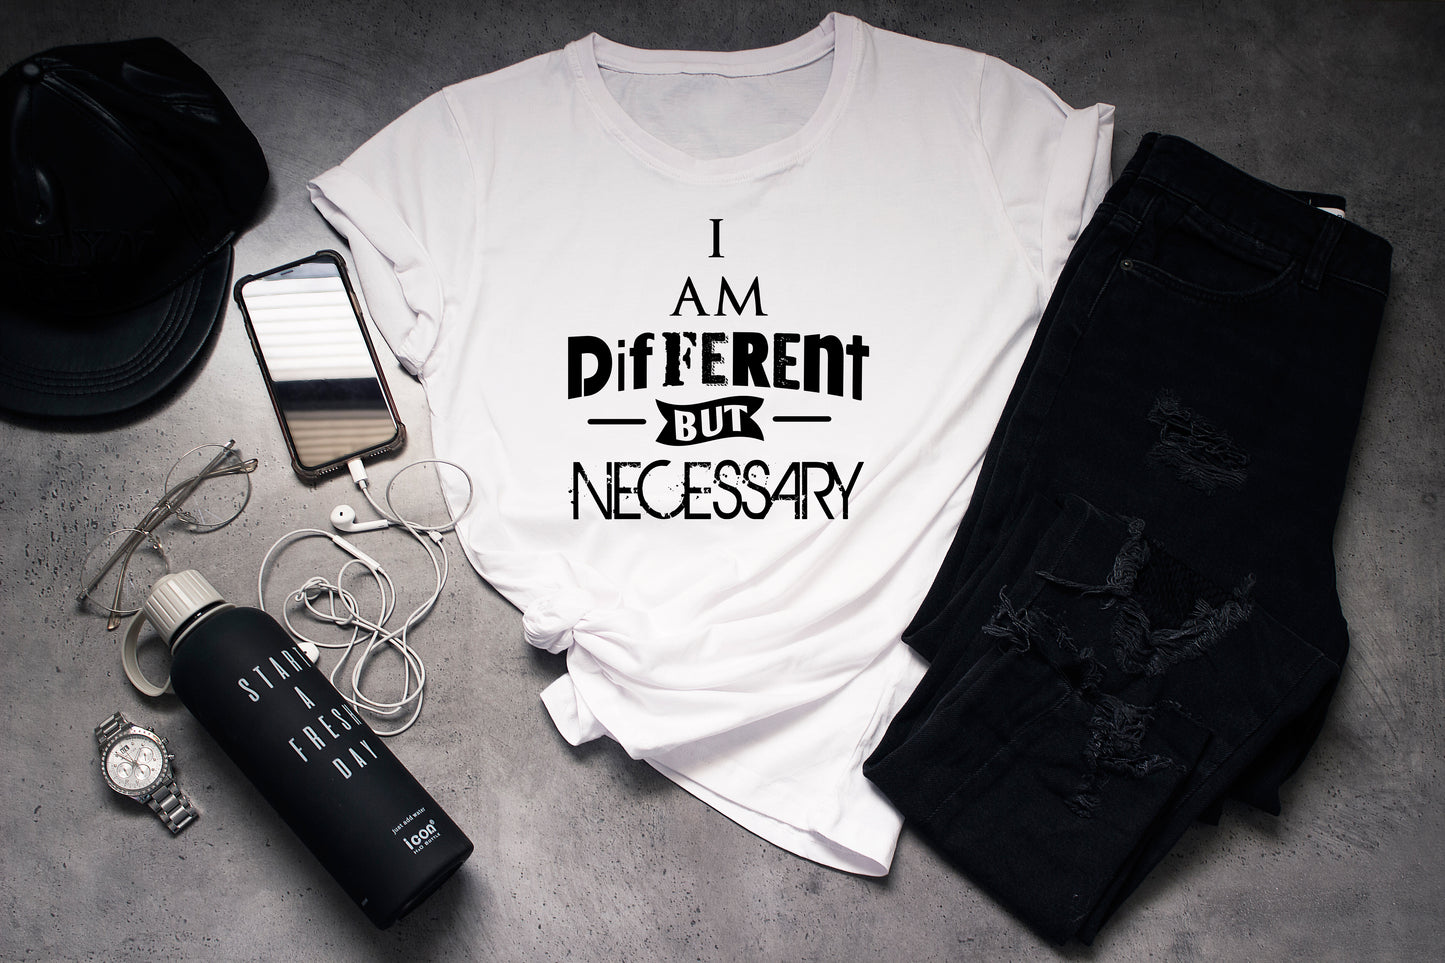 I Am Different But Necessary - Design Color As Shown Only in Black